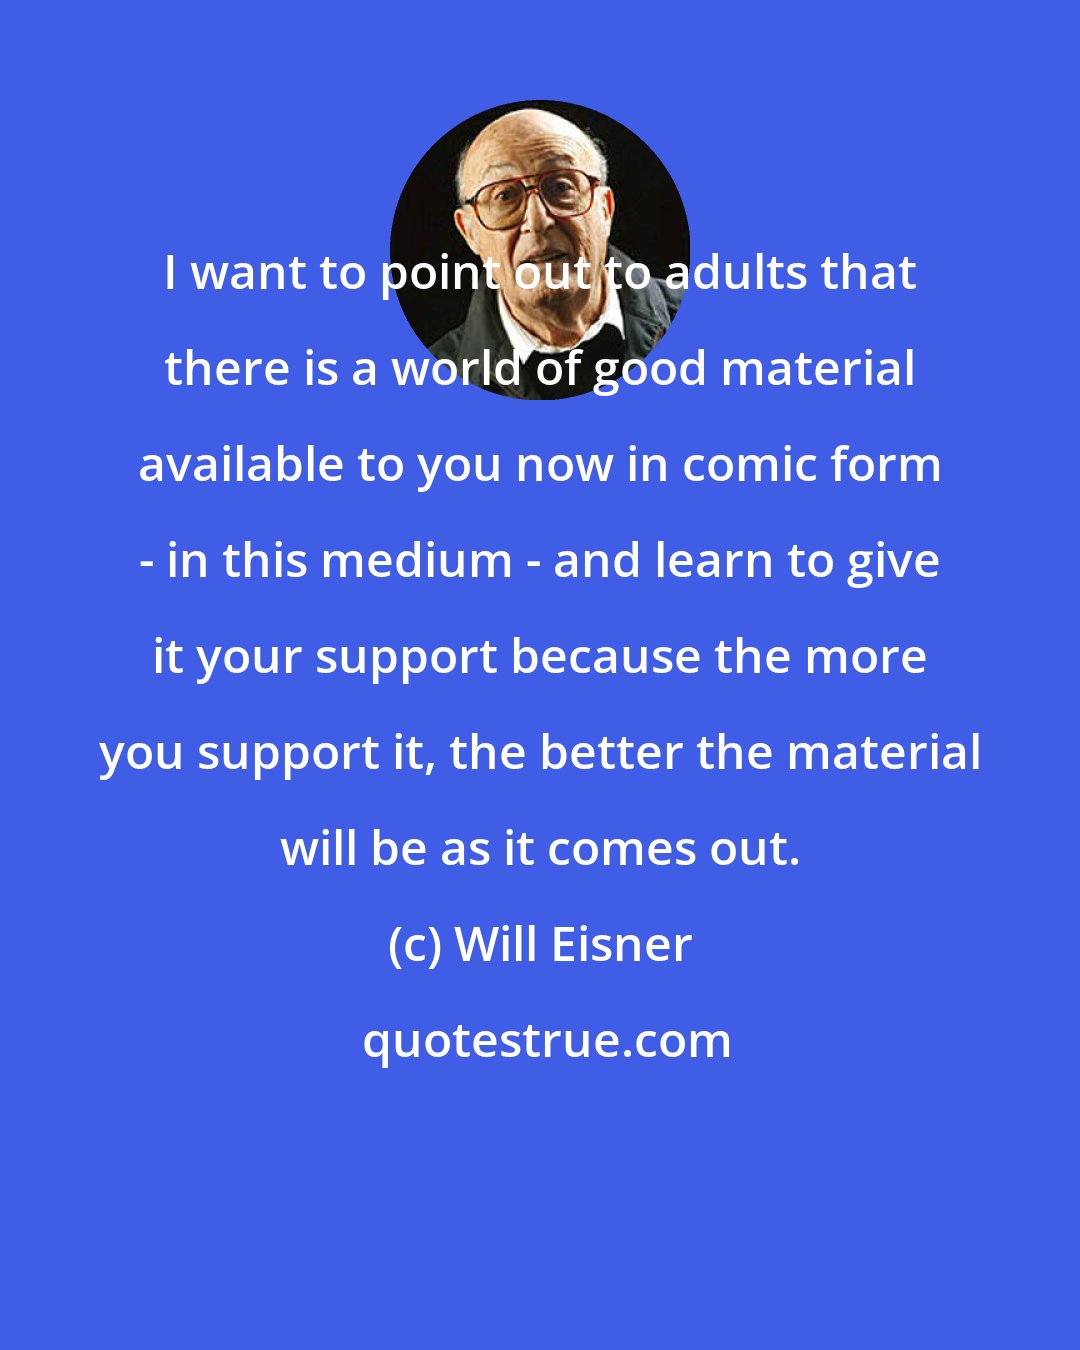 Will Eisner: I want to point out to adults that there is a world of good material available to you now in comic form - in this medium - and learn to give it your support because the more you support it, the better the material will be as it comes out.